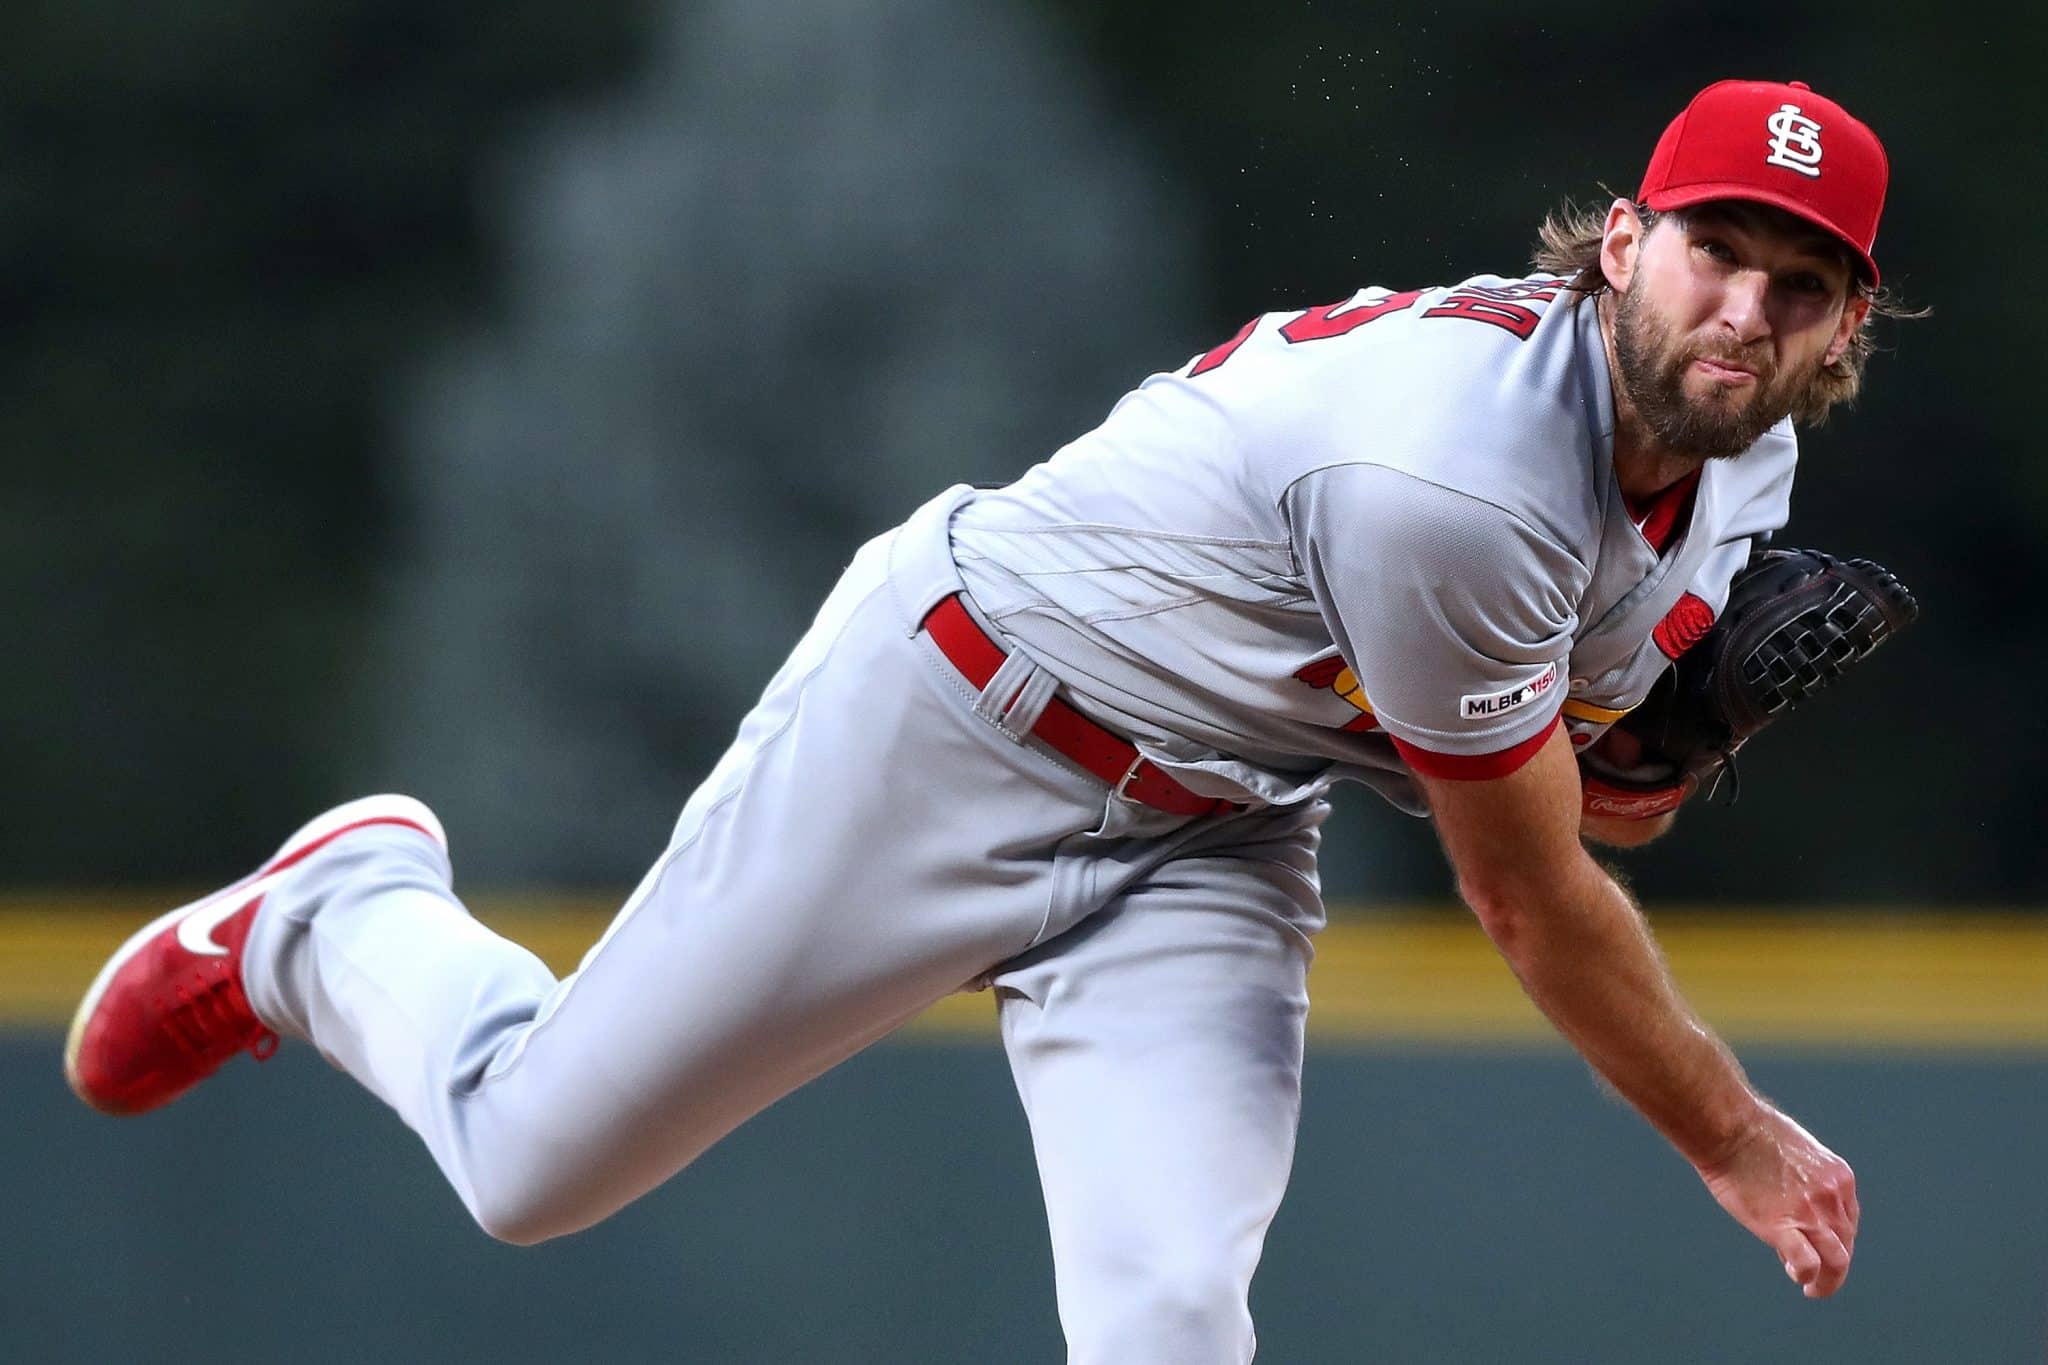 Starting pitcher Michael Wacha #52 of the St Louis Cardinals throws in the first inning against the Colorado Rockies at Coors Field on September 10, 2019 in Denver, Colorado.